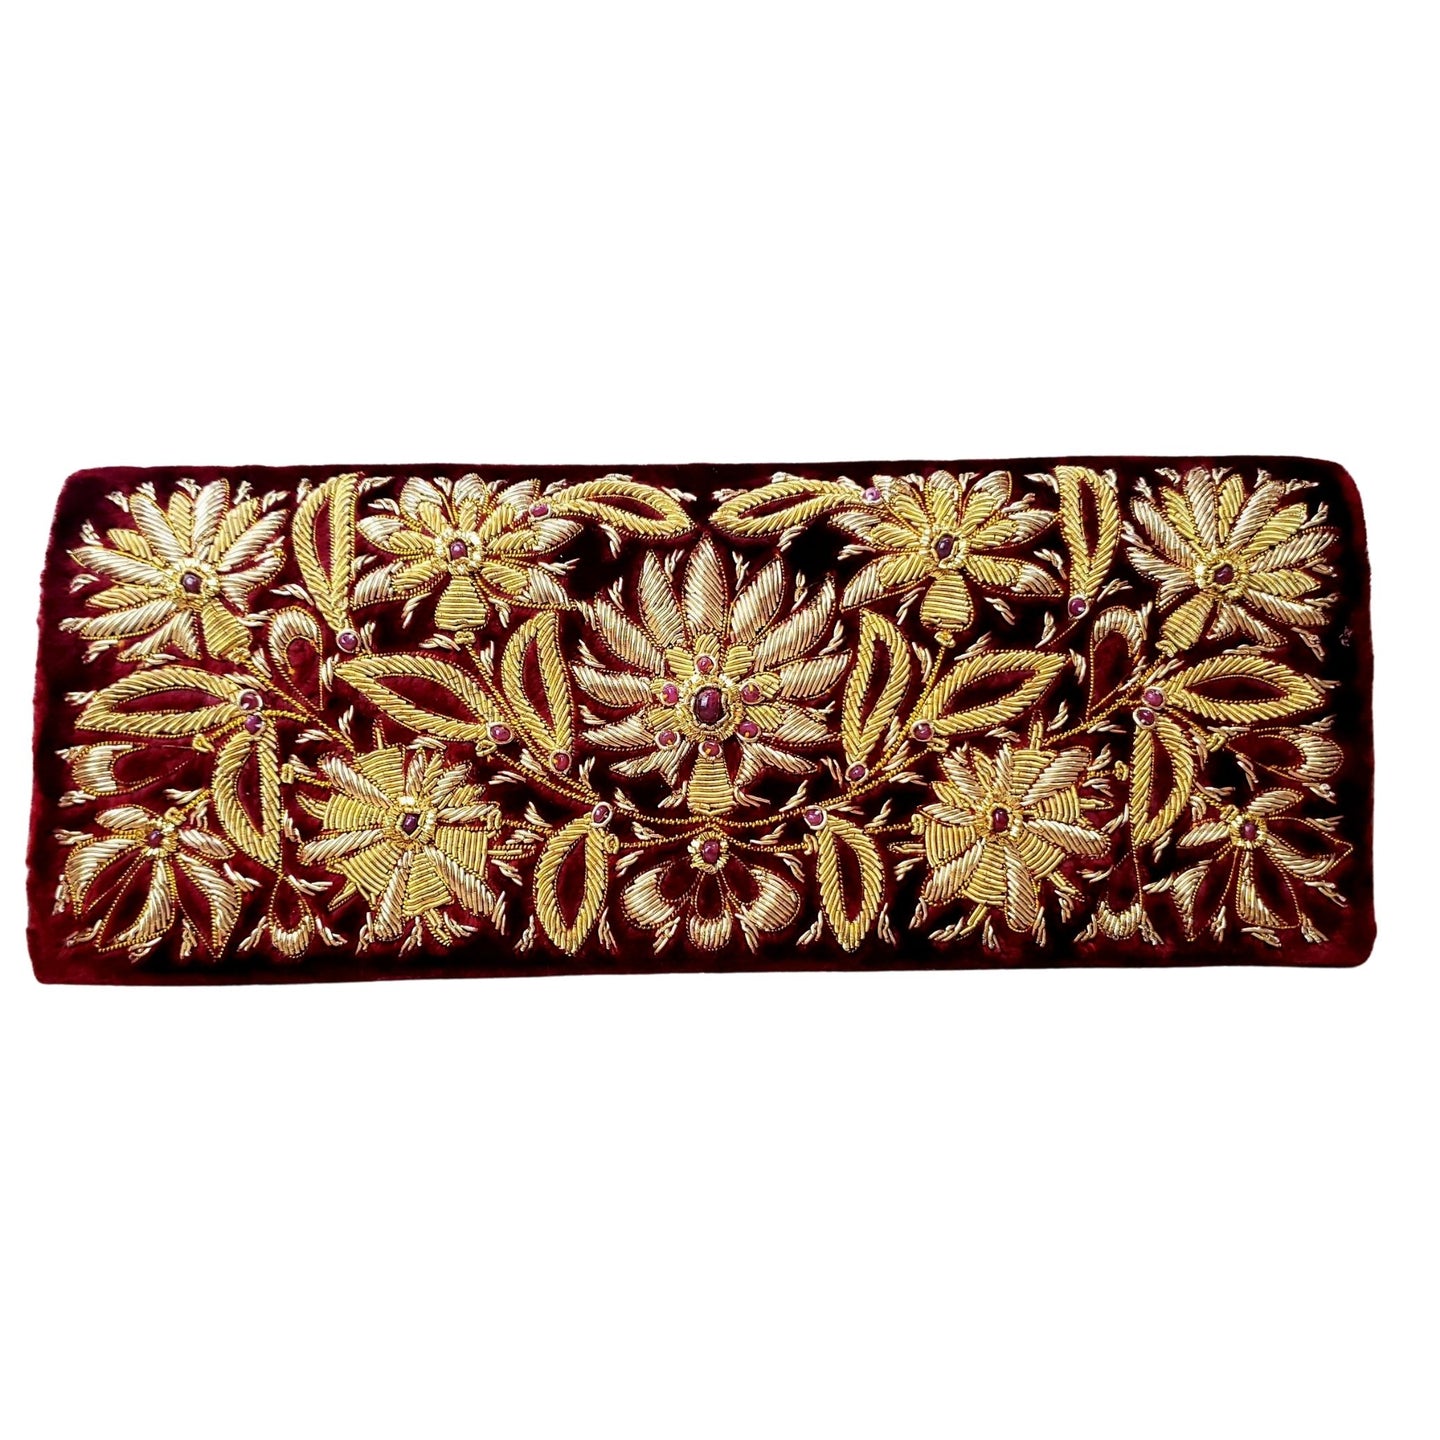 Luxury burgundy velvet clutch hand embroidered with goldwork and inlaid with rubies, zardozi clutch.